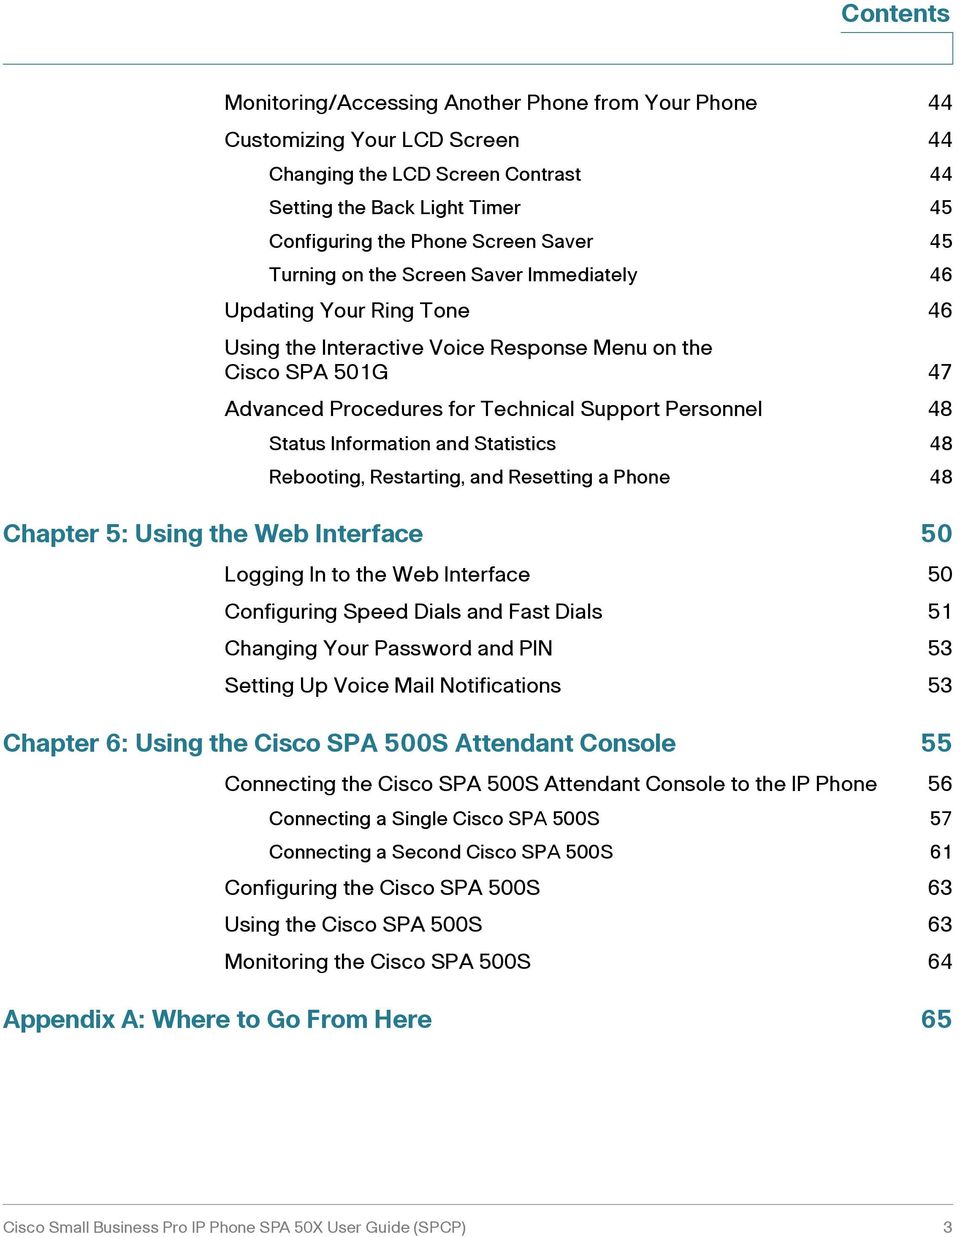 Information and Statistics 48 Rebooting, Restarting, and Resetting a Phone 48 Chapter 5: Using the Web Interface 50 Logging In to the Web Interface 50 Configuring Speed Dials and Fast Dials 51